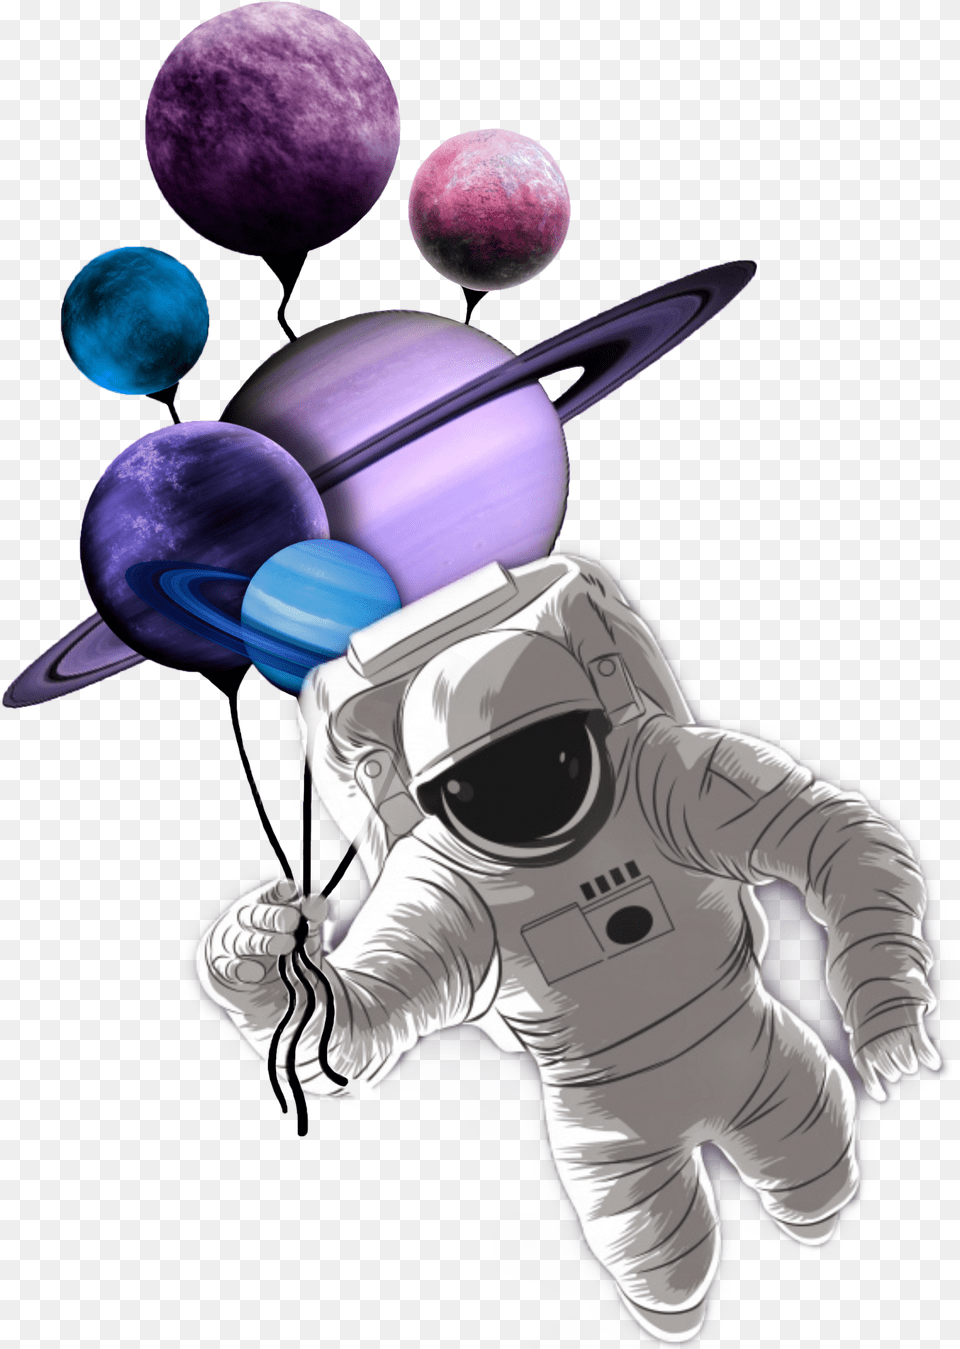 Freetoedit Planets Astronaut Planets Balloon Clipart Free Transparent Png